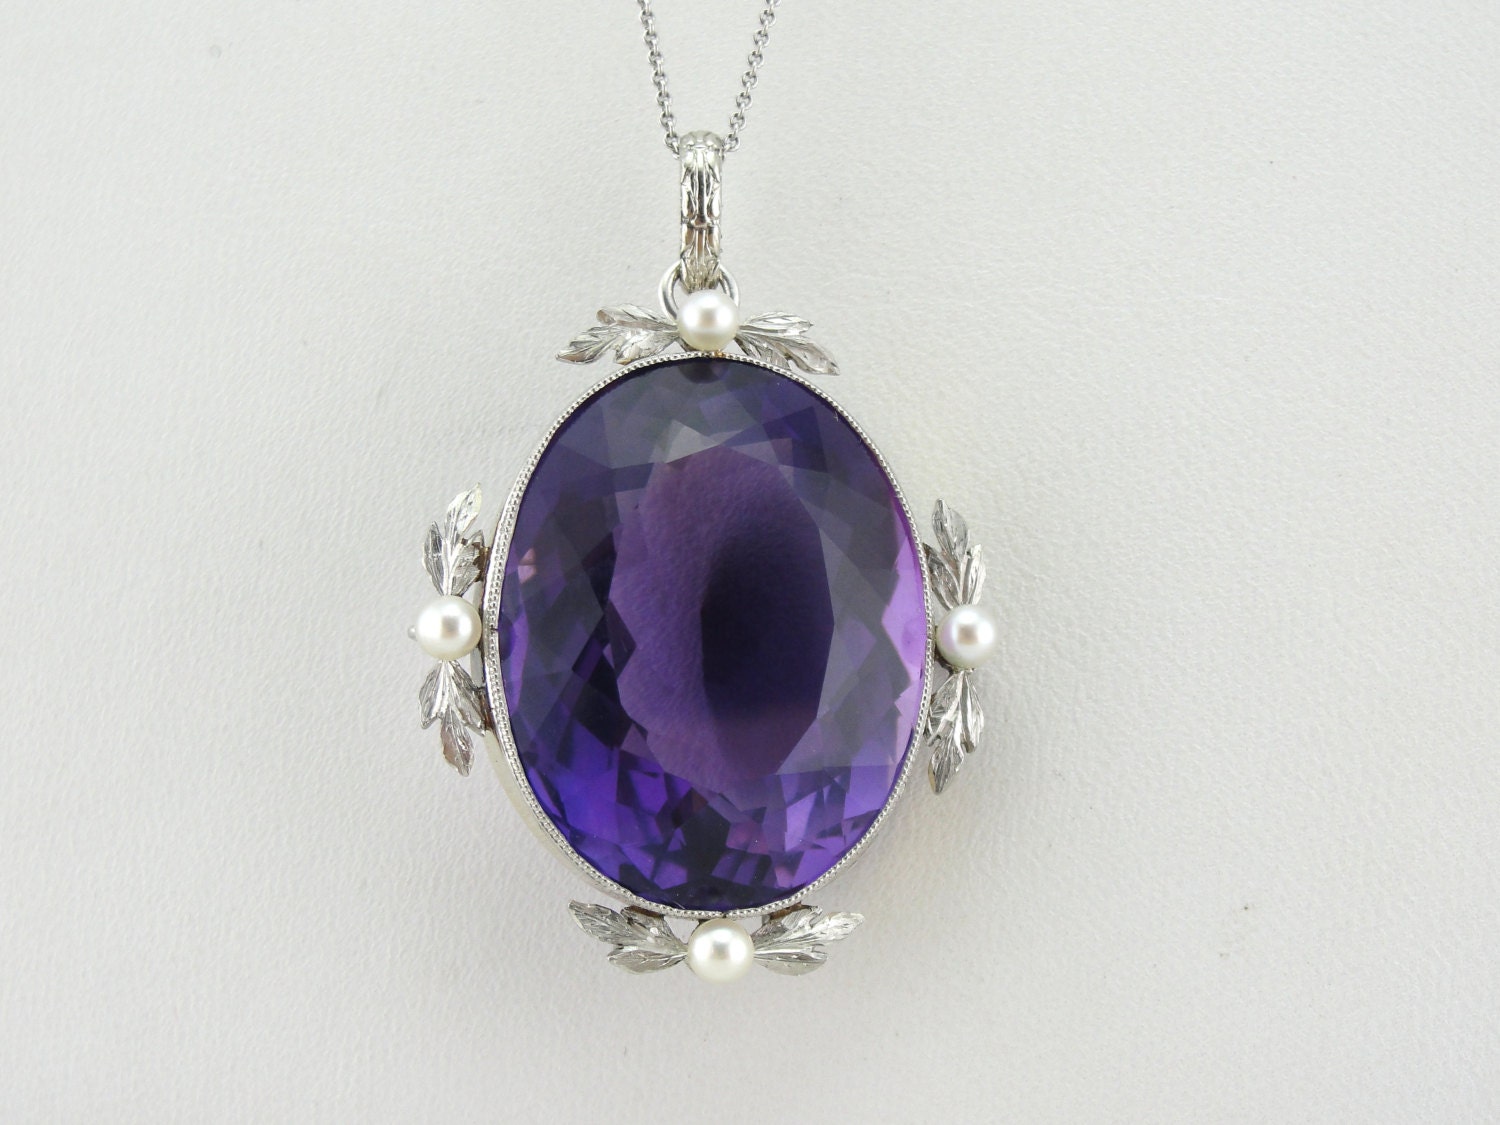 The Edwardian Socialite: Rare Amethyst and Antique Gold - Etsy